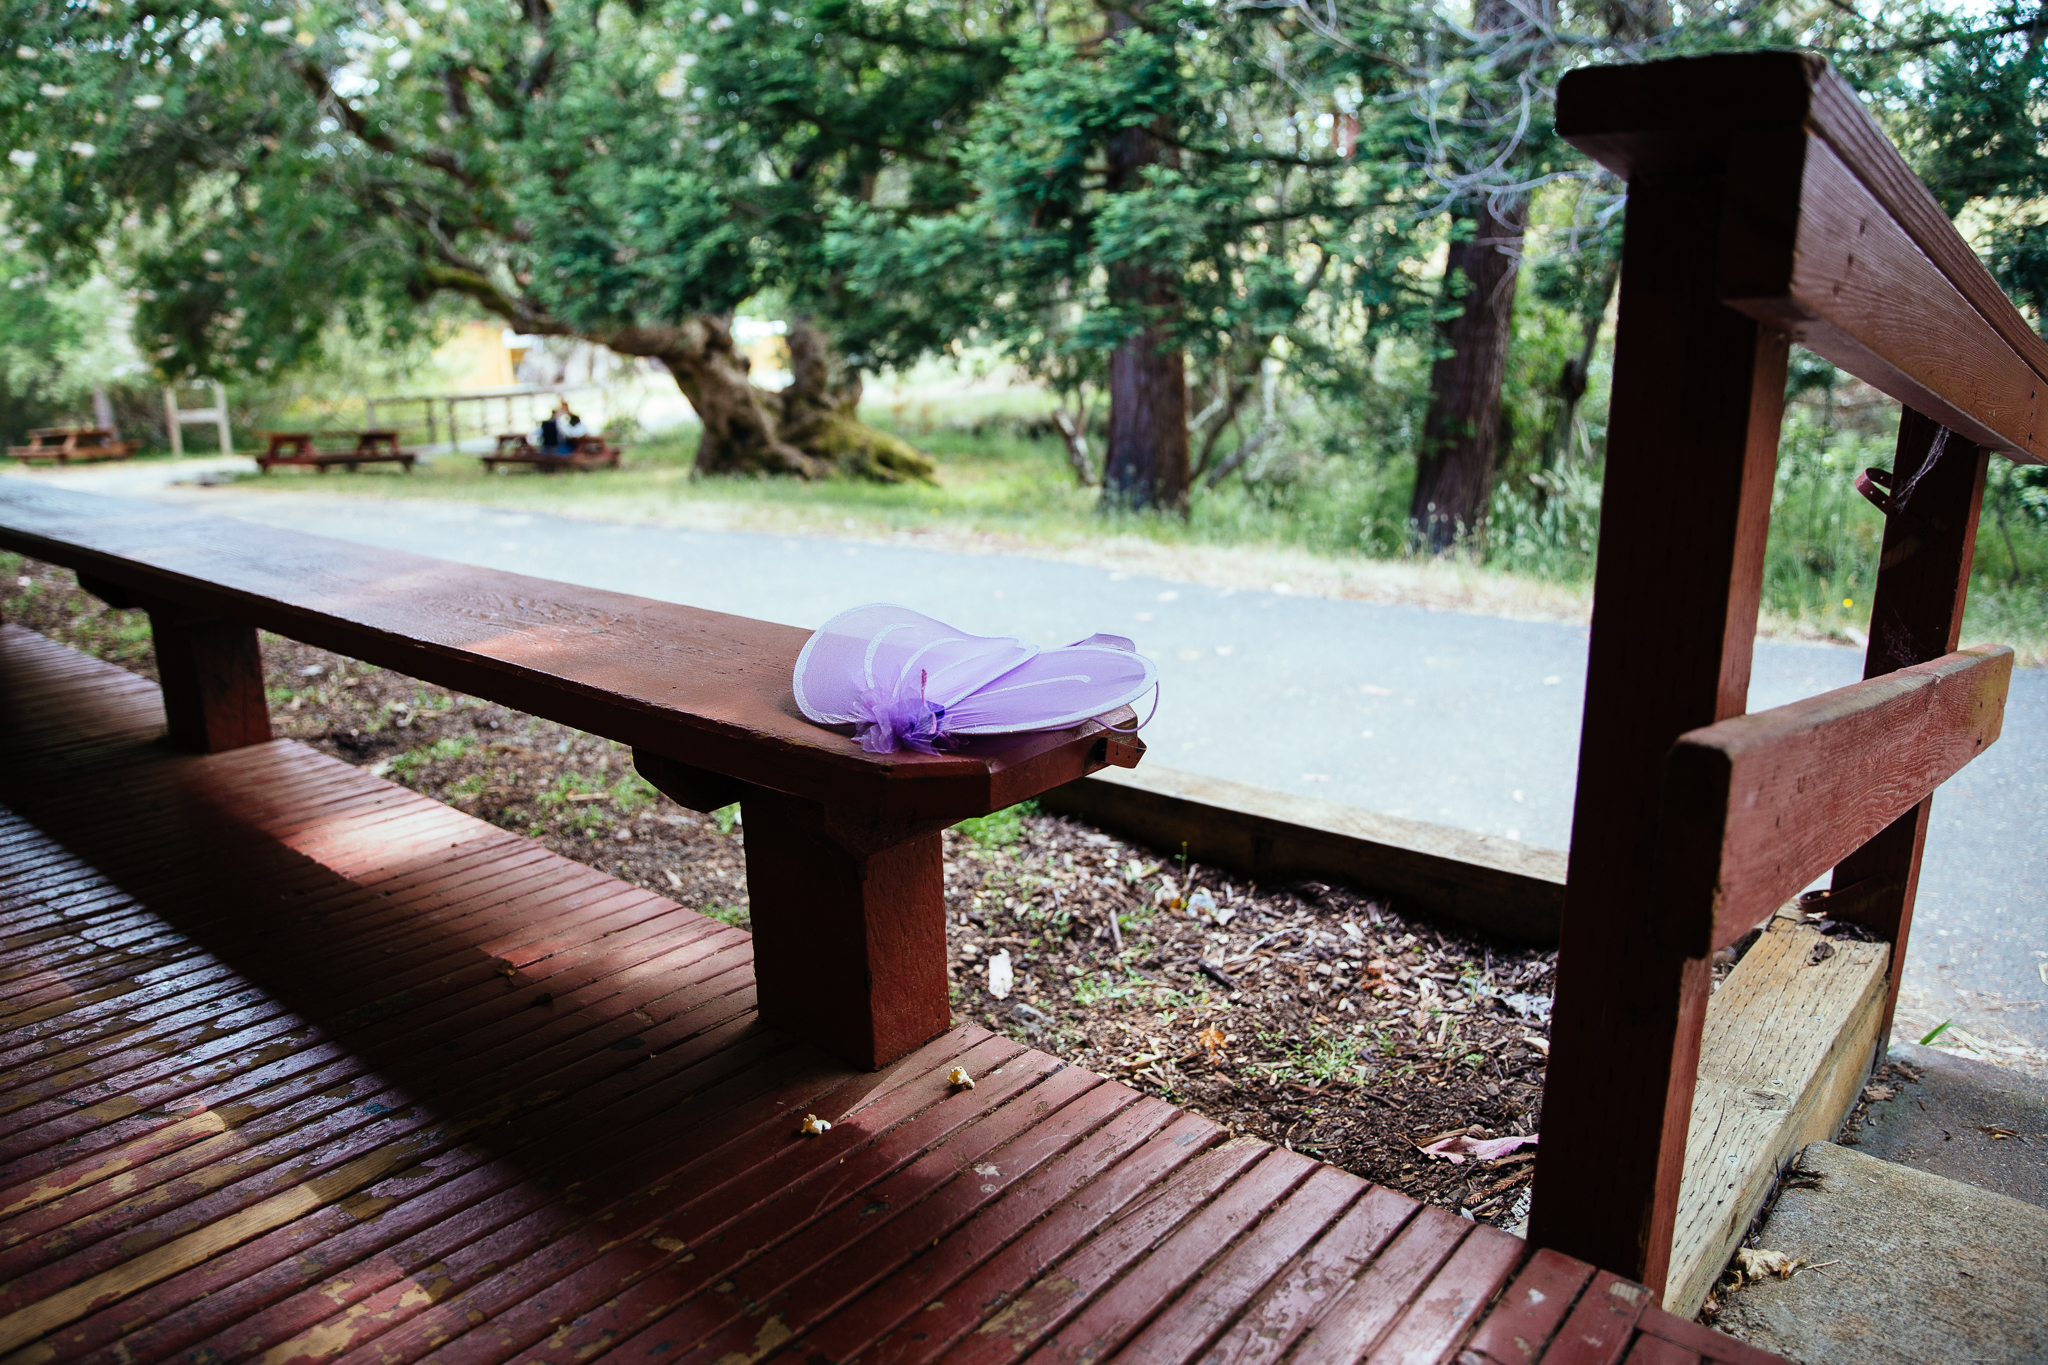 A pair of SVARA fairy wings sit on a bench on a dark wooden deck. In the background, there is a road, and behind that, a row of trees.